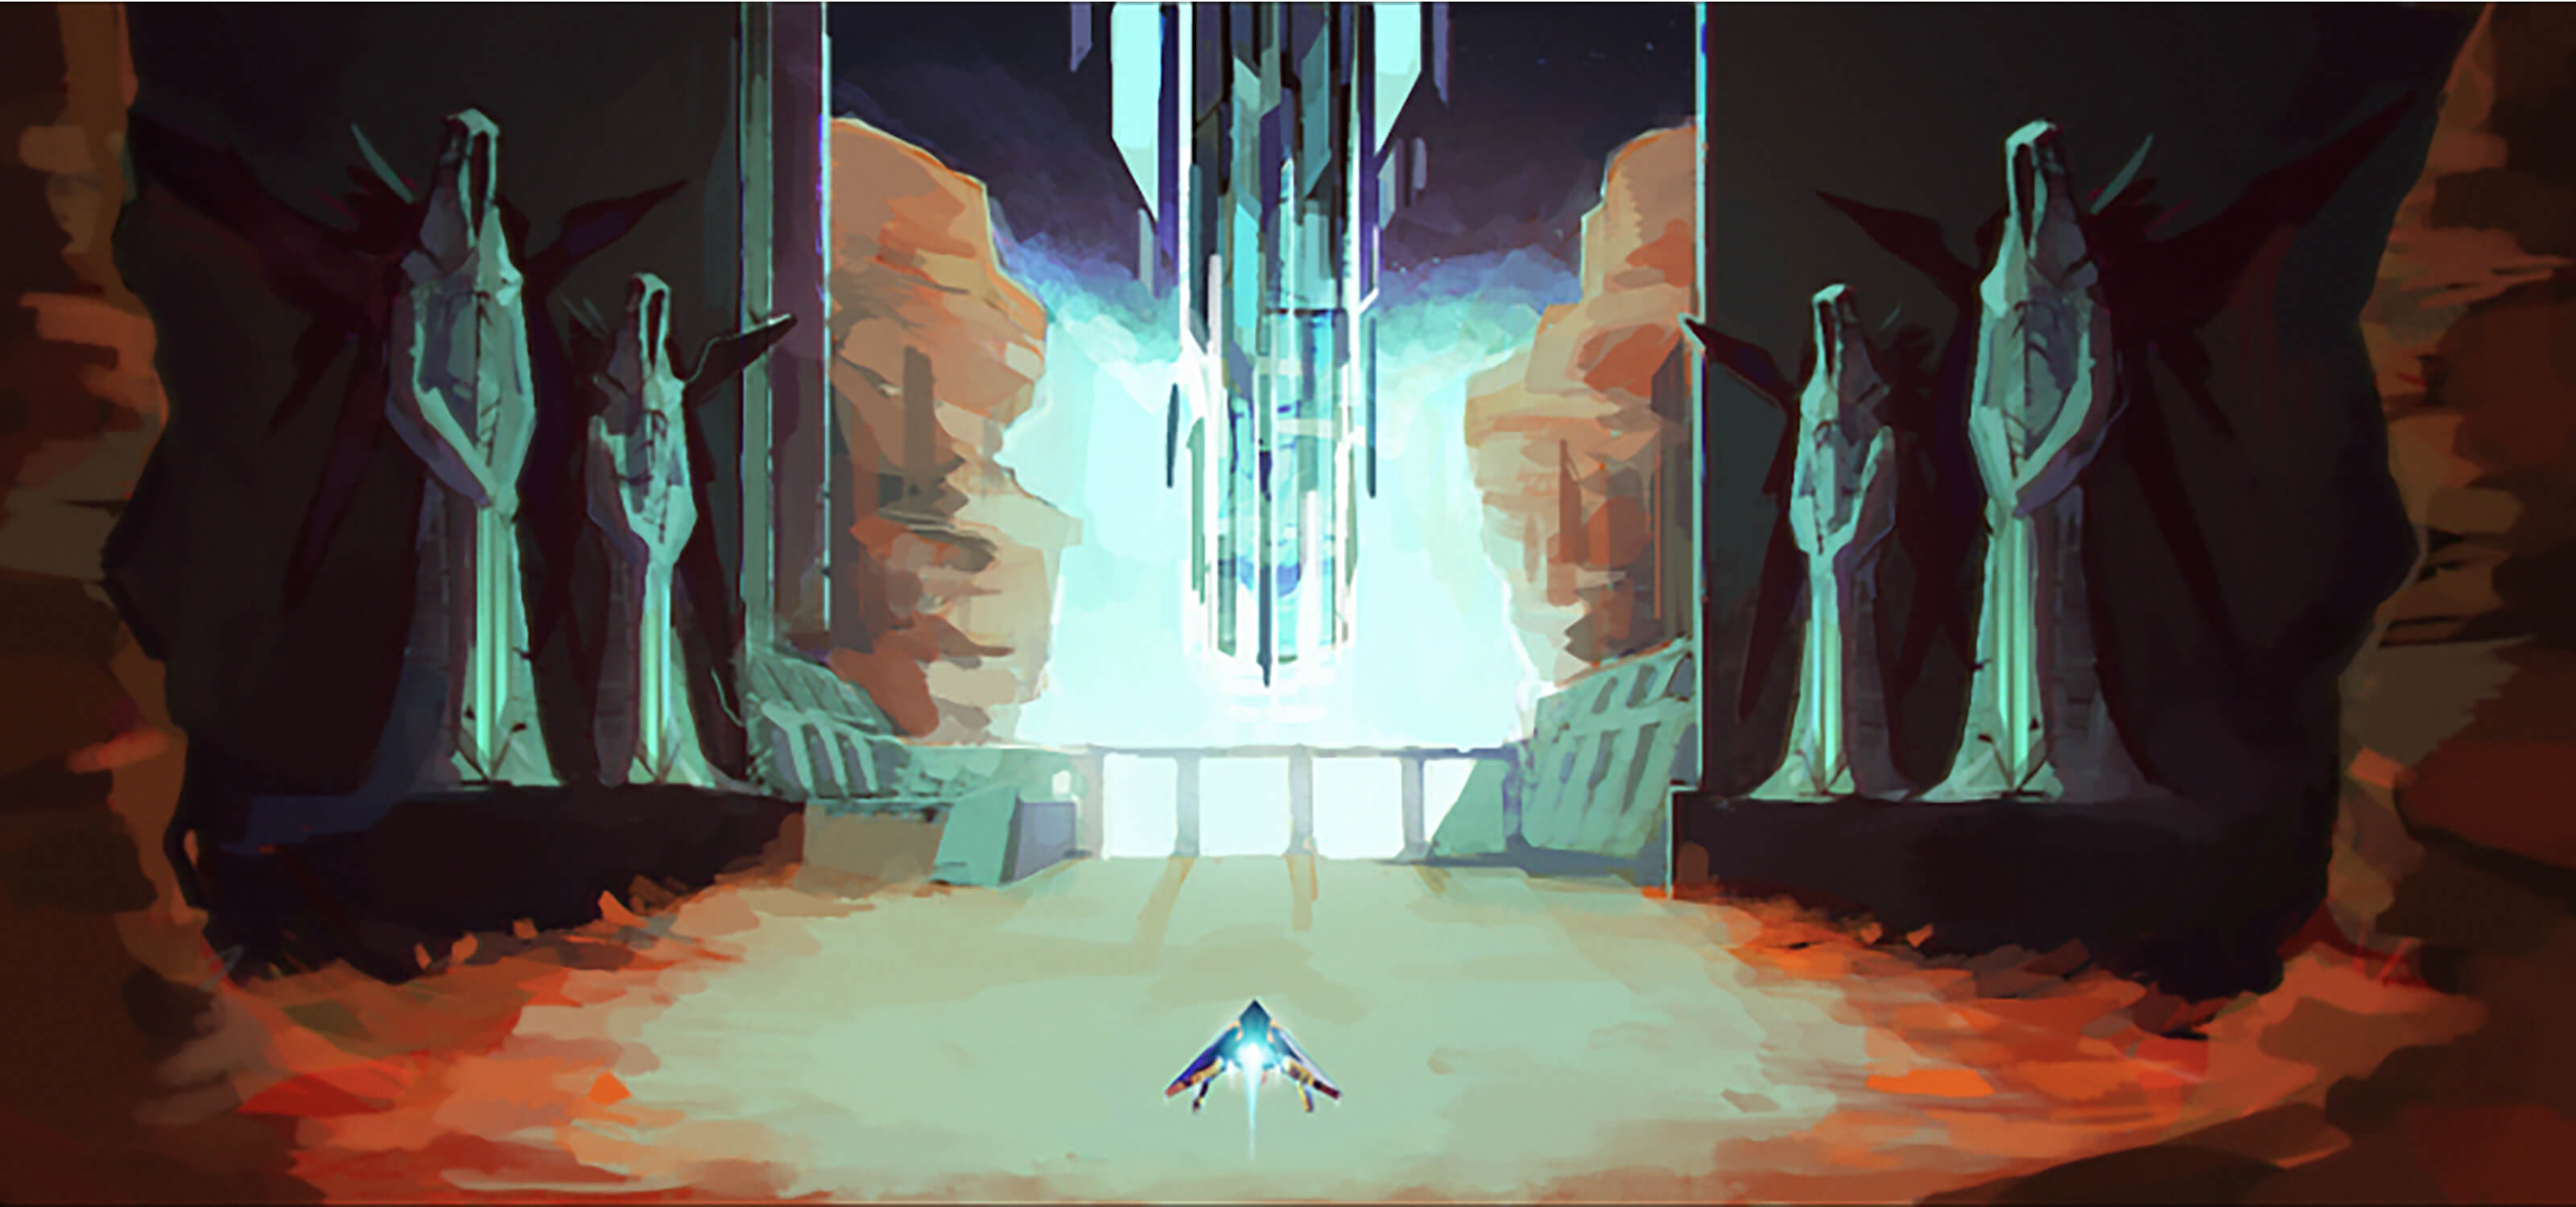 Digital painting of a hovercraft vehicle at the entrance of a vast chamber, flanked by large statues of alien hooded figures.